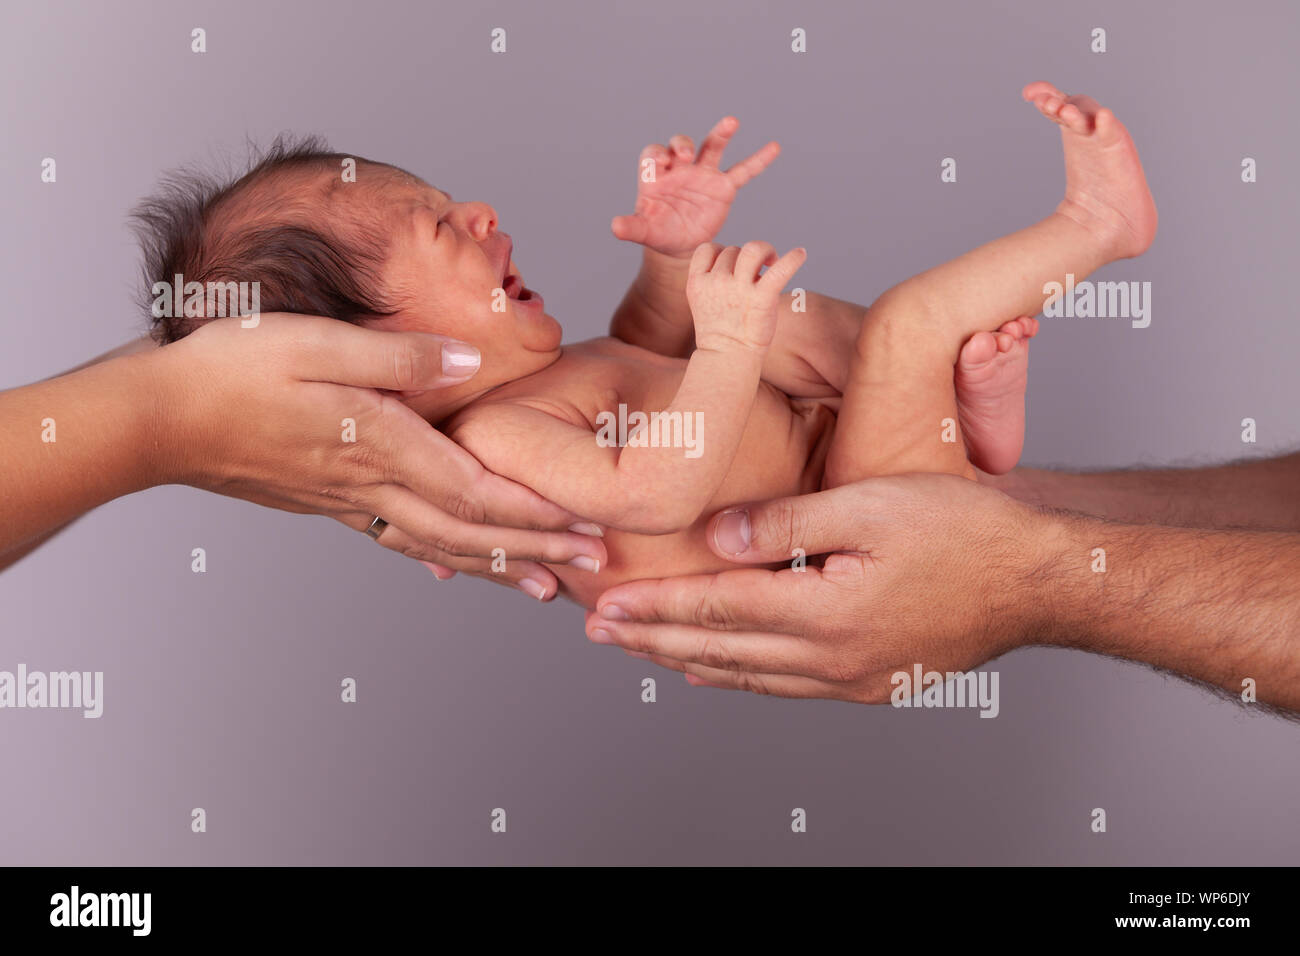 newborn baby in her arms mom and dad. Concept of love, protection of children Stock Photo